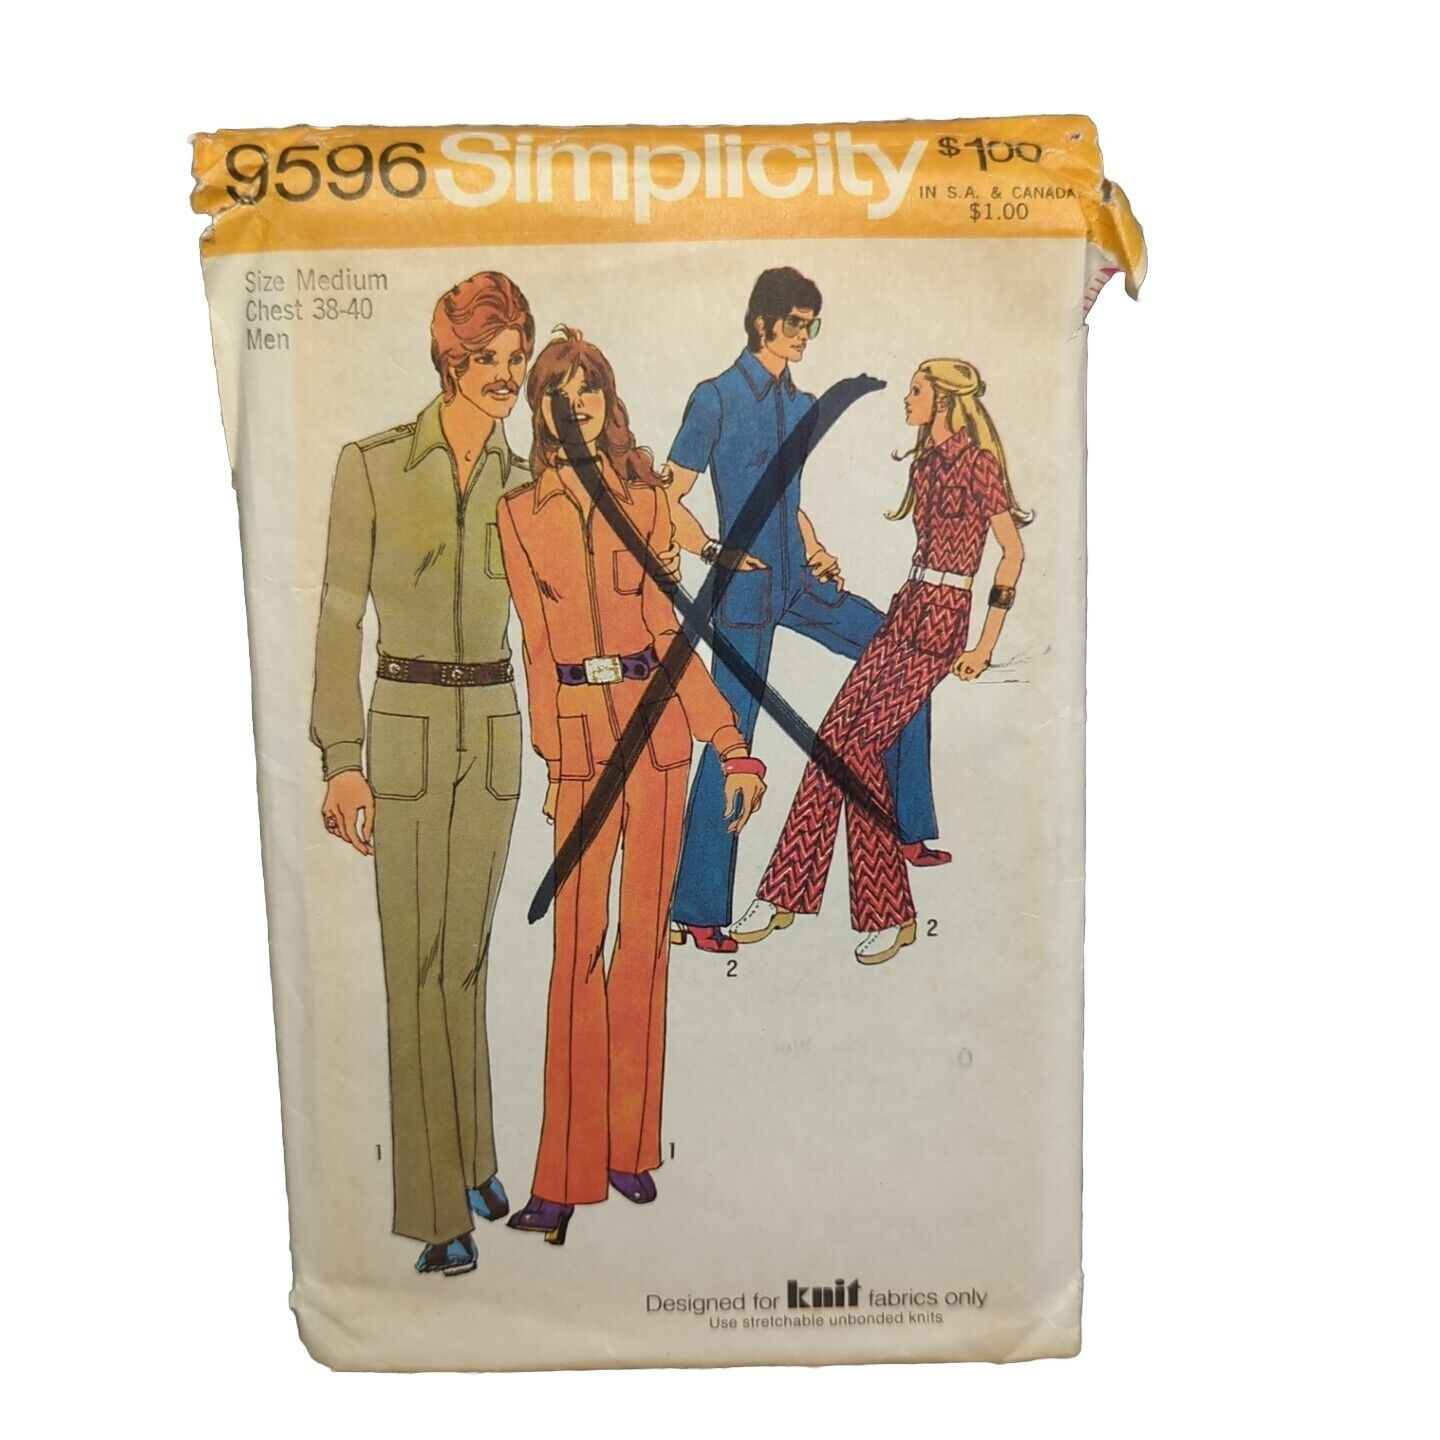 Vintage 1970s Simplicity 9596 sewing pattern Mens and Misses Jumpsuit Med 38-40